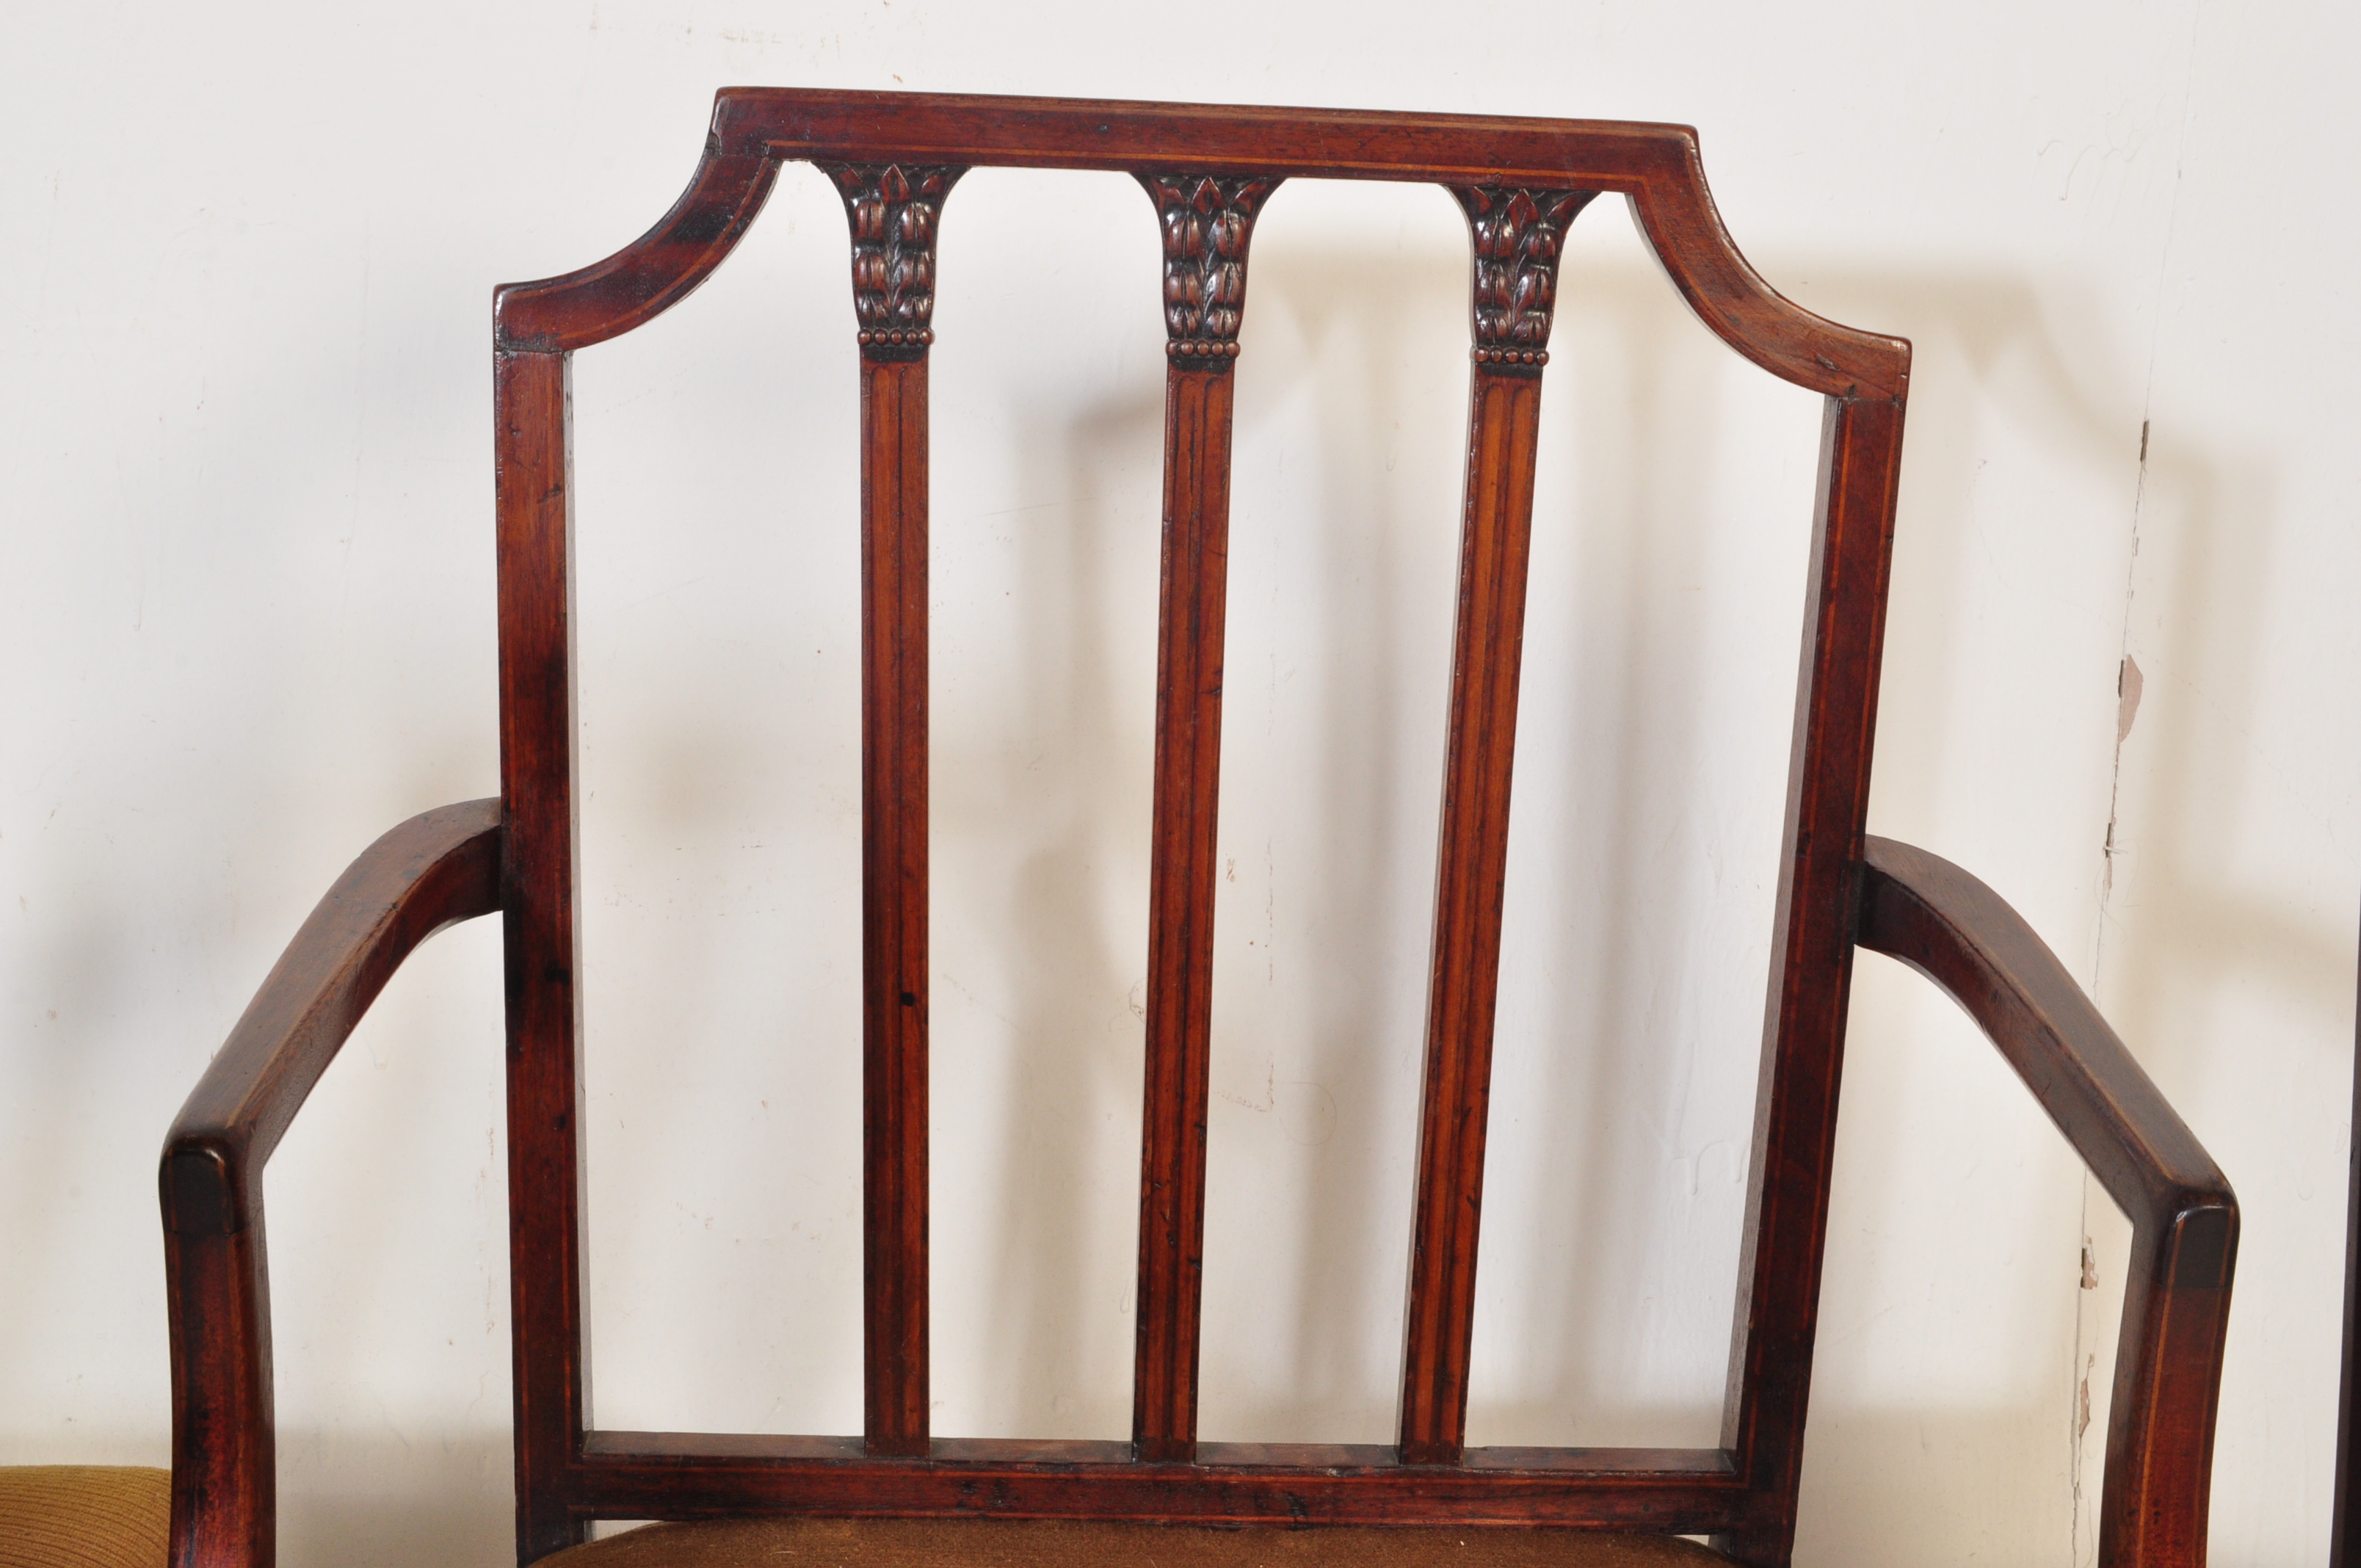 FOUR EDWARDIAN INLAID MAHOGANY DINING CHAIRS - Image 4 of 6